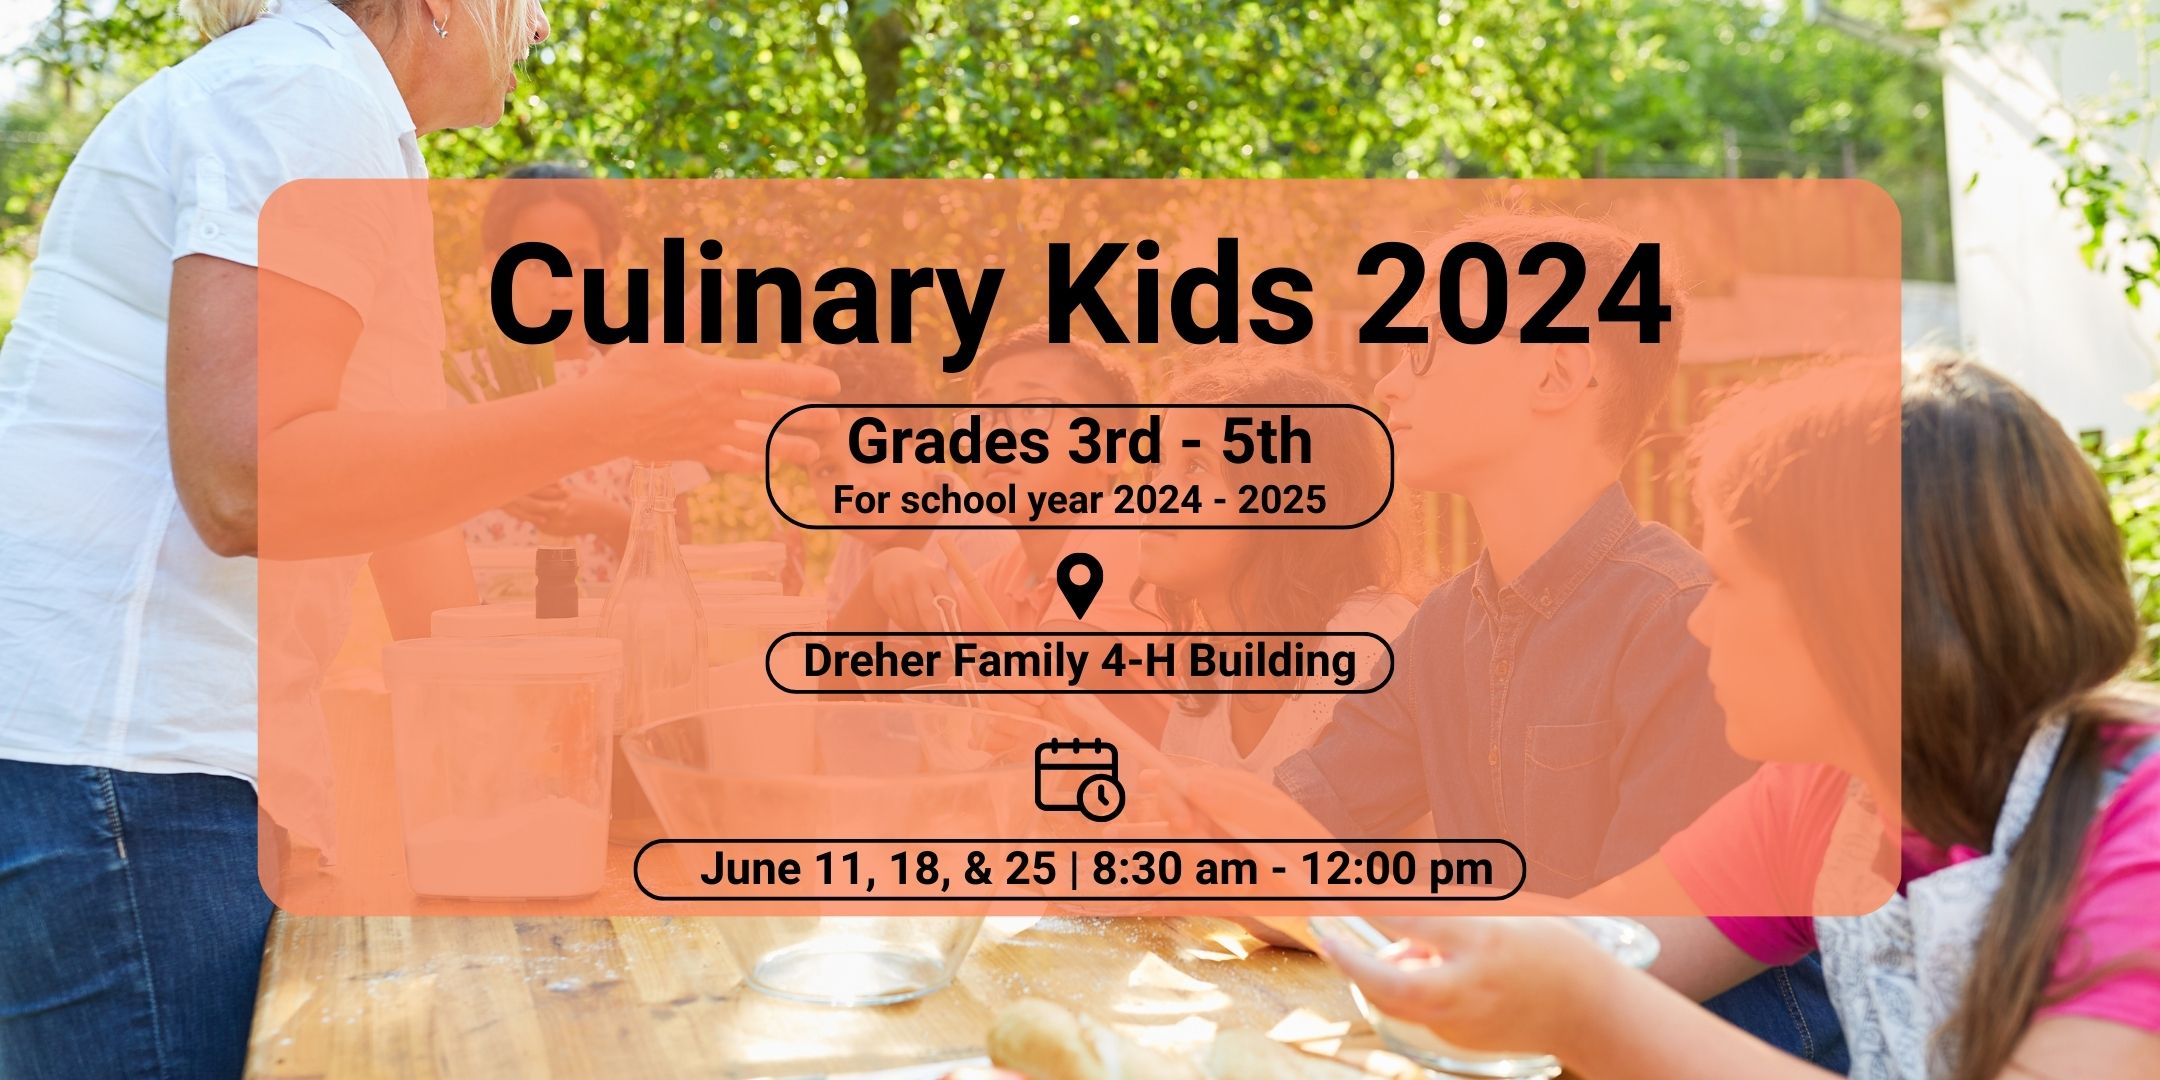 Dreher Family 4-H Building June 11, 18, & 25 | 8:30 am - 12:00 pm Culinary Kids 2024 Grades 3rd - 5th For school year 2024 - 2025